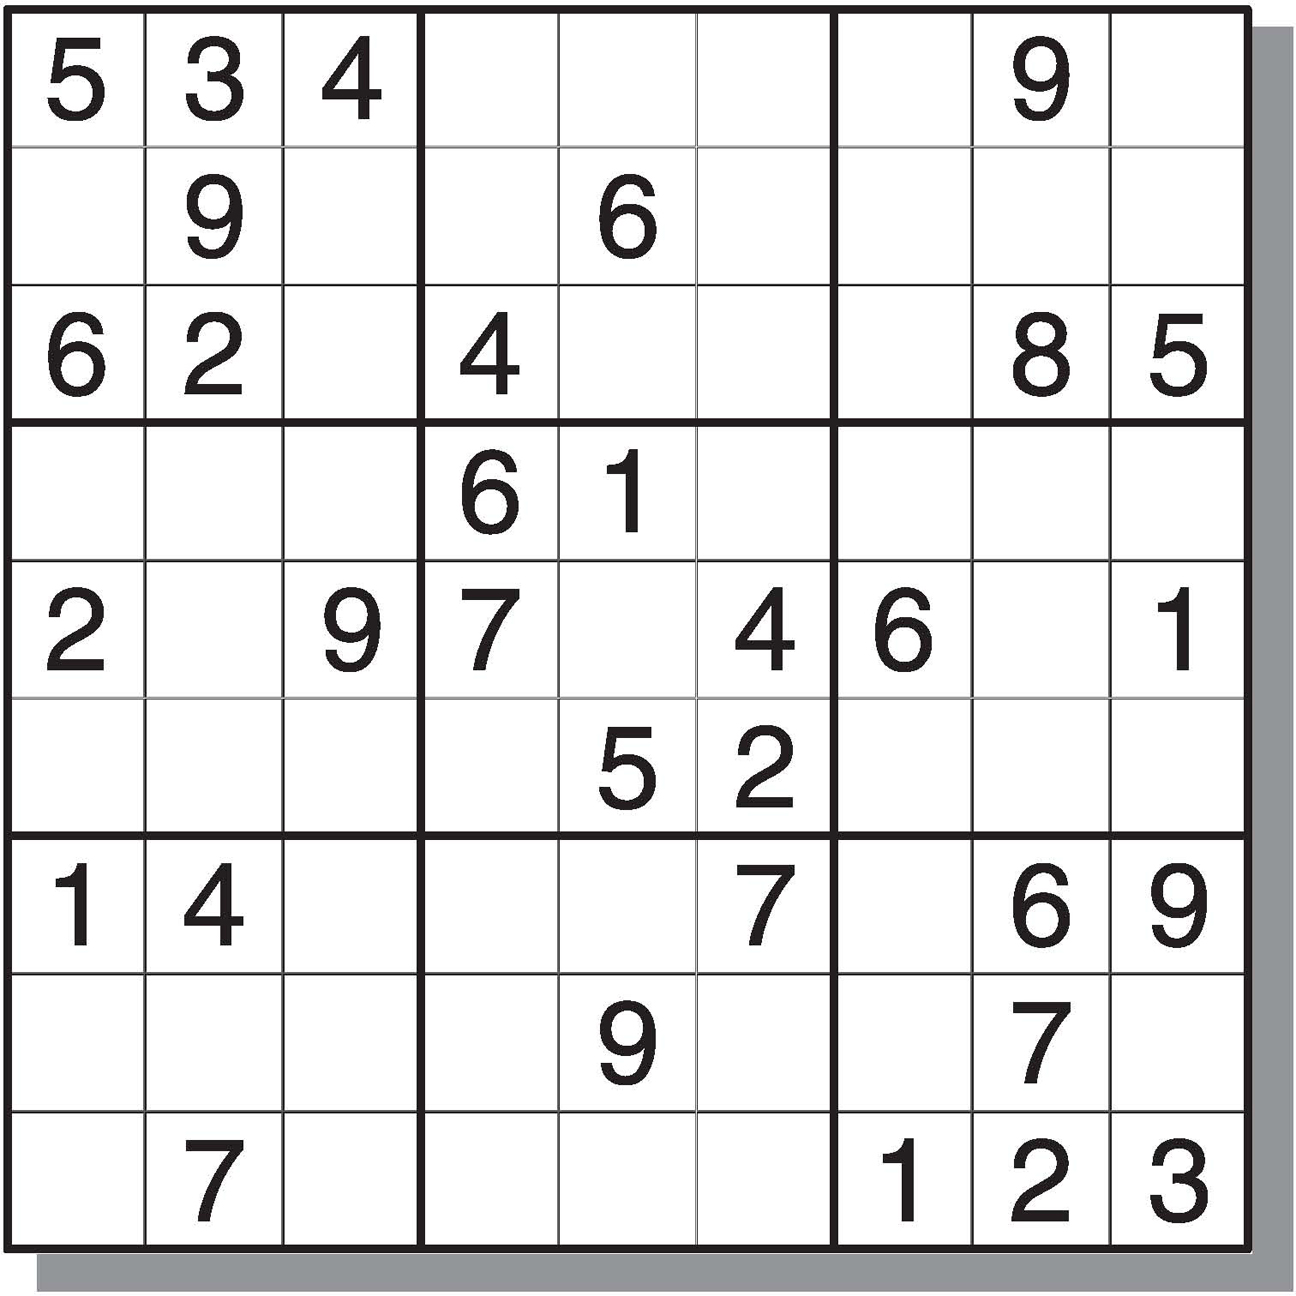 8-best-images-of-printable-sudoku-with-answers-free-medium-printable-sudoku-printable-6-per